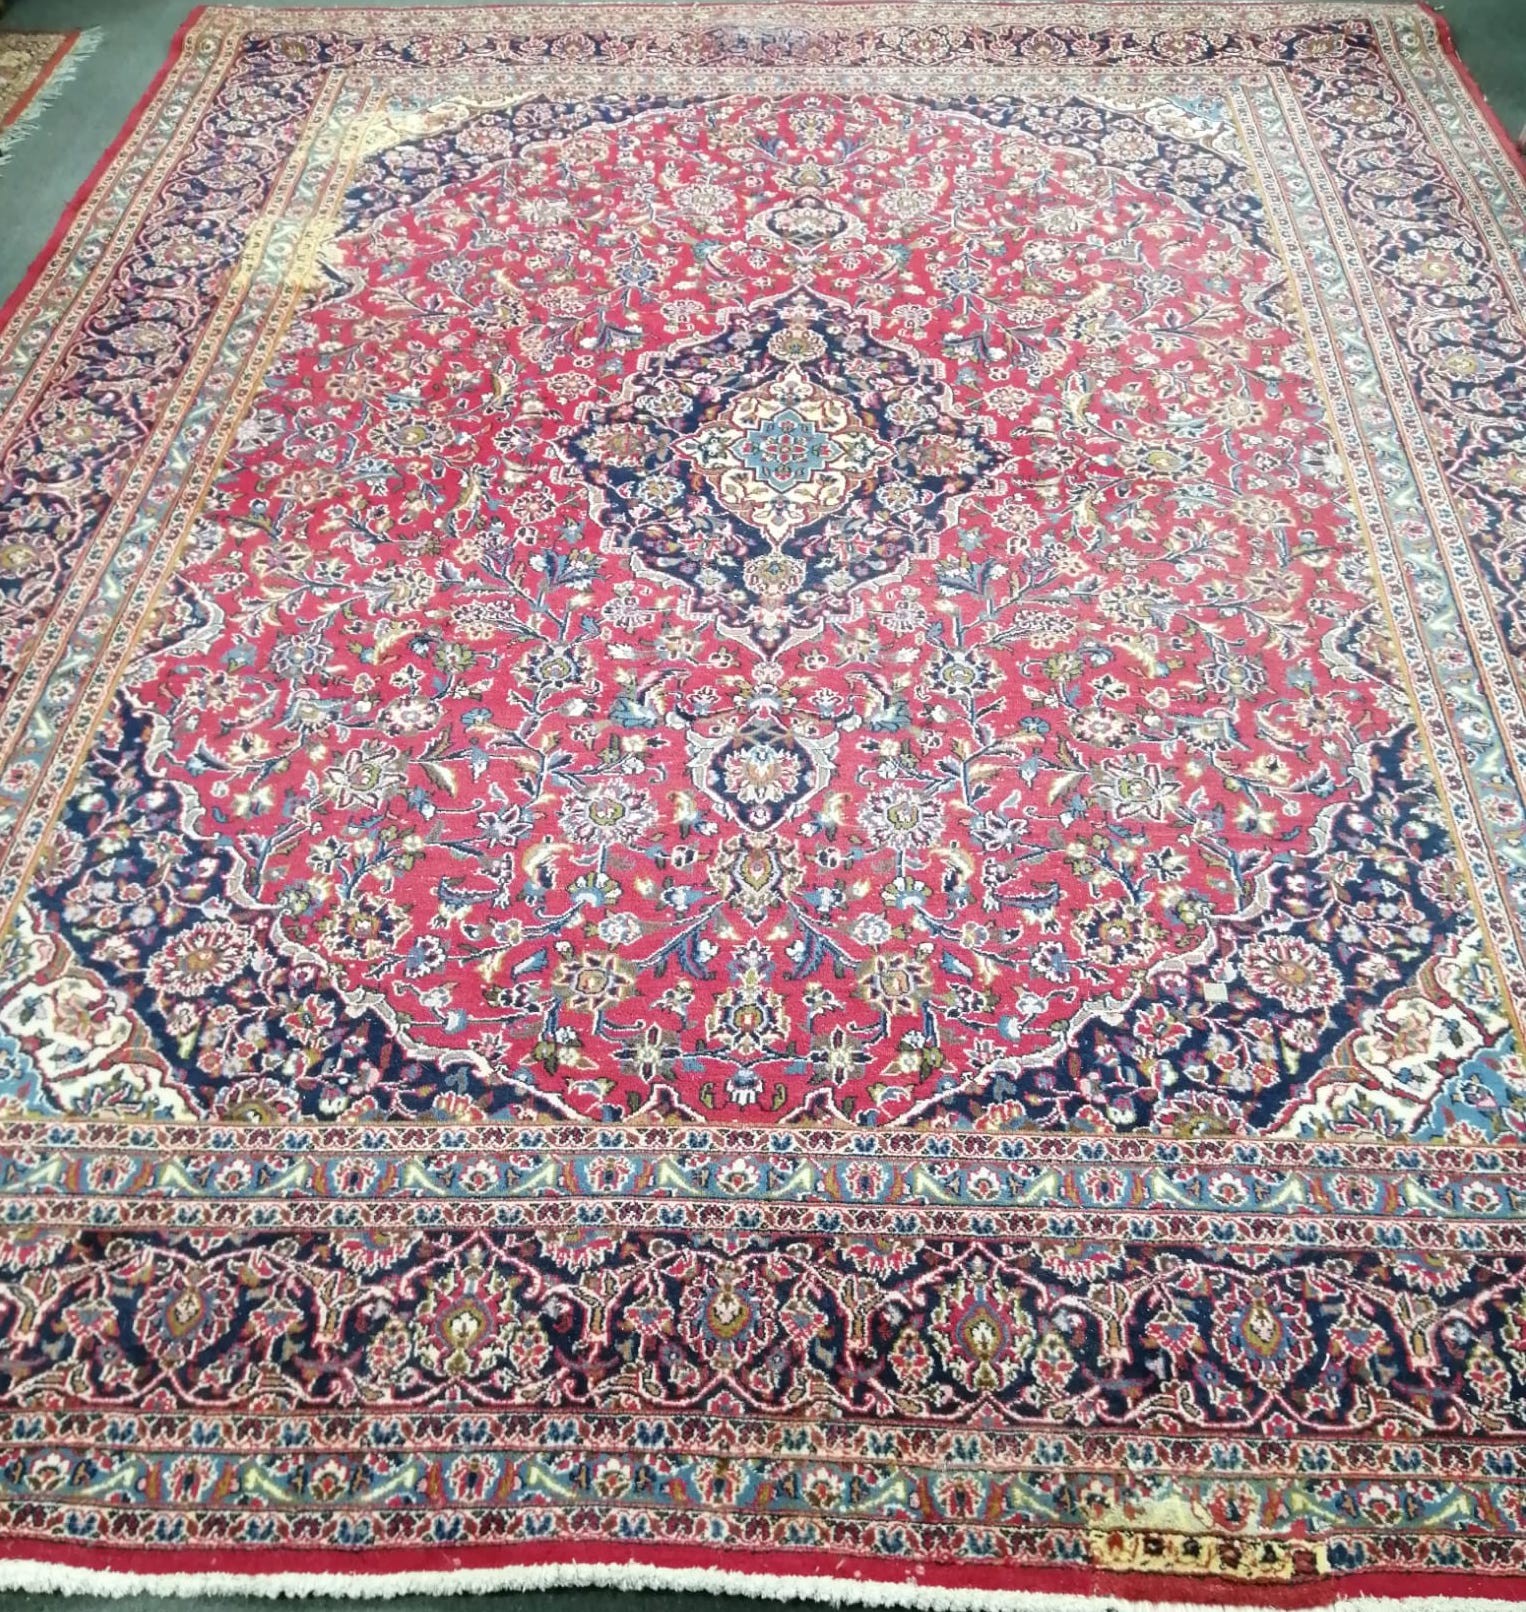 A Persian red ground carpet, 377 x 291cm, some bleach stains *Please note the sale commences at 9am.